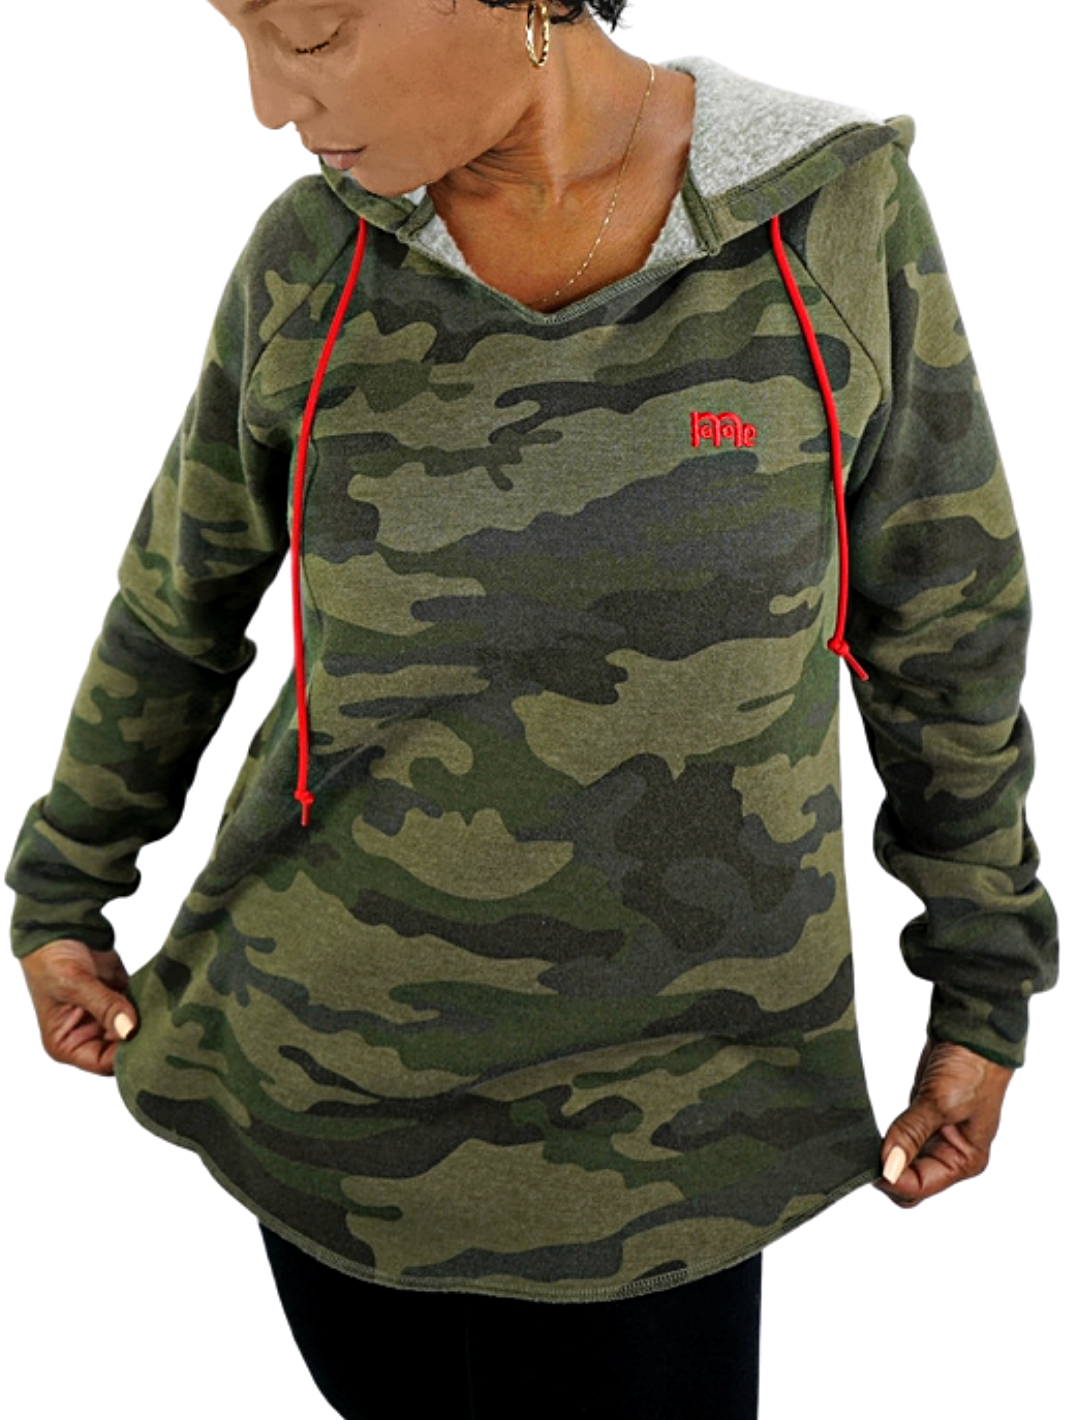 Women's Green Camouflage Tunic Top, can also be worn as a dress, offers a stylish cut design and superior comfort while representing GOD in you with Red logo at left chest and Roamns 12 : 21 on hood. Order Yours Today!